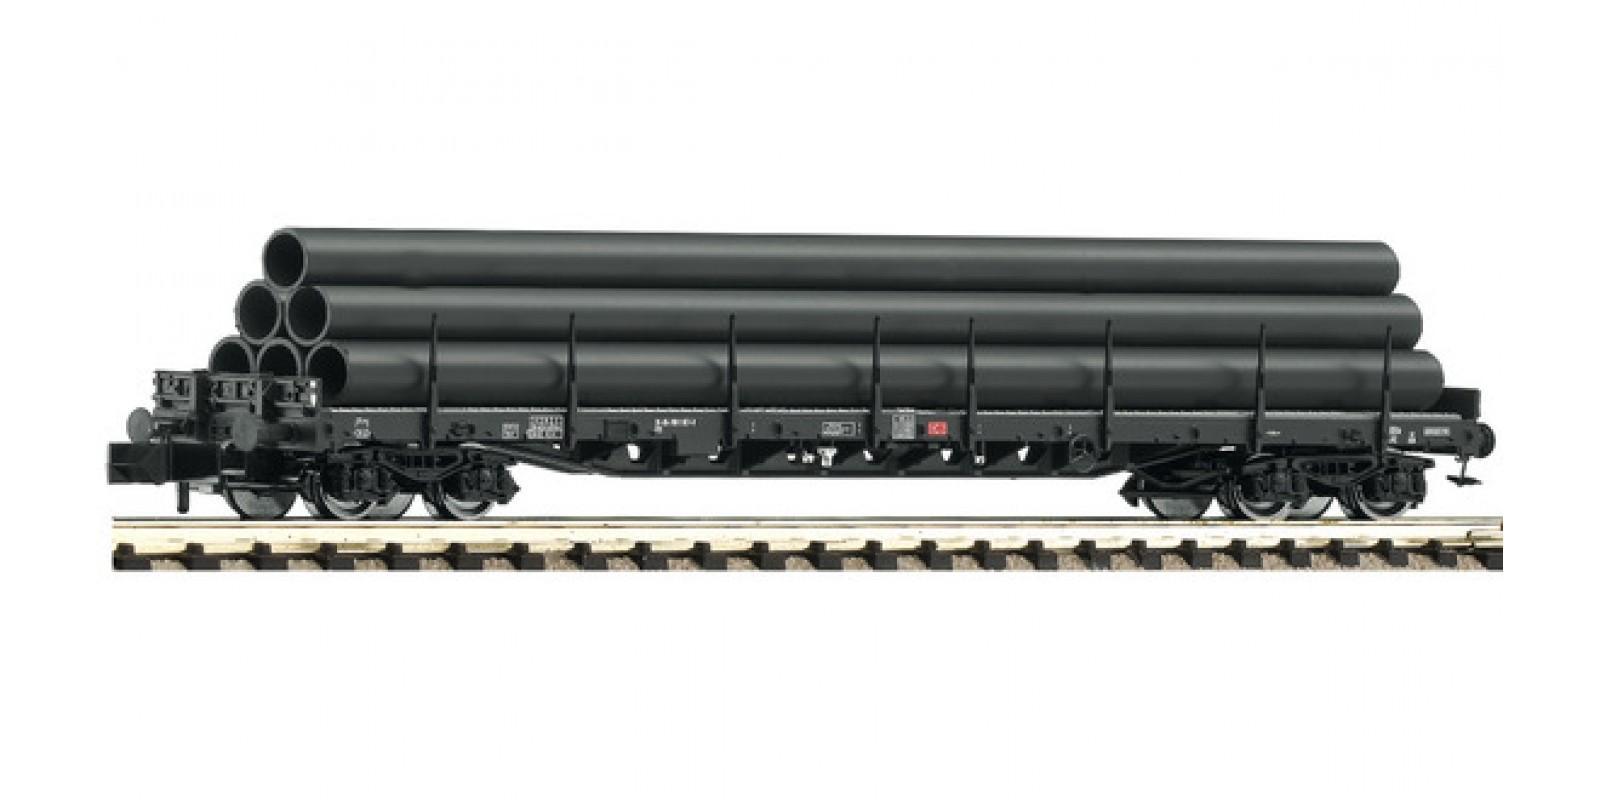 FL826809 - Stake wagon type typ Rs 684 that carries tubes, DB AG